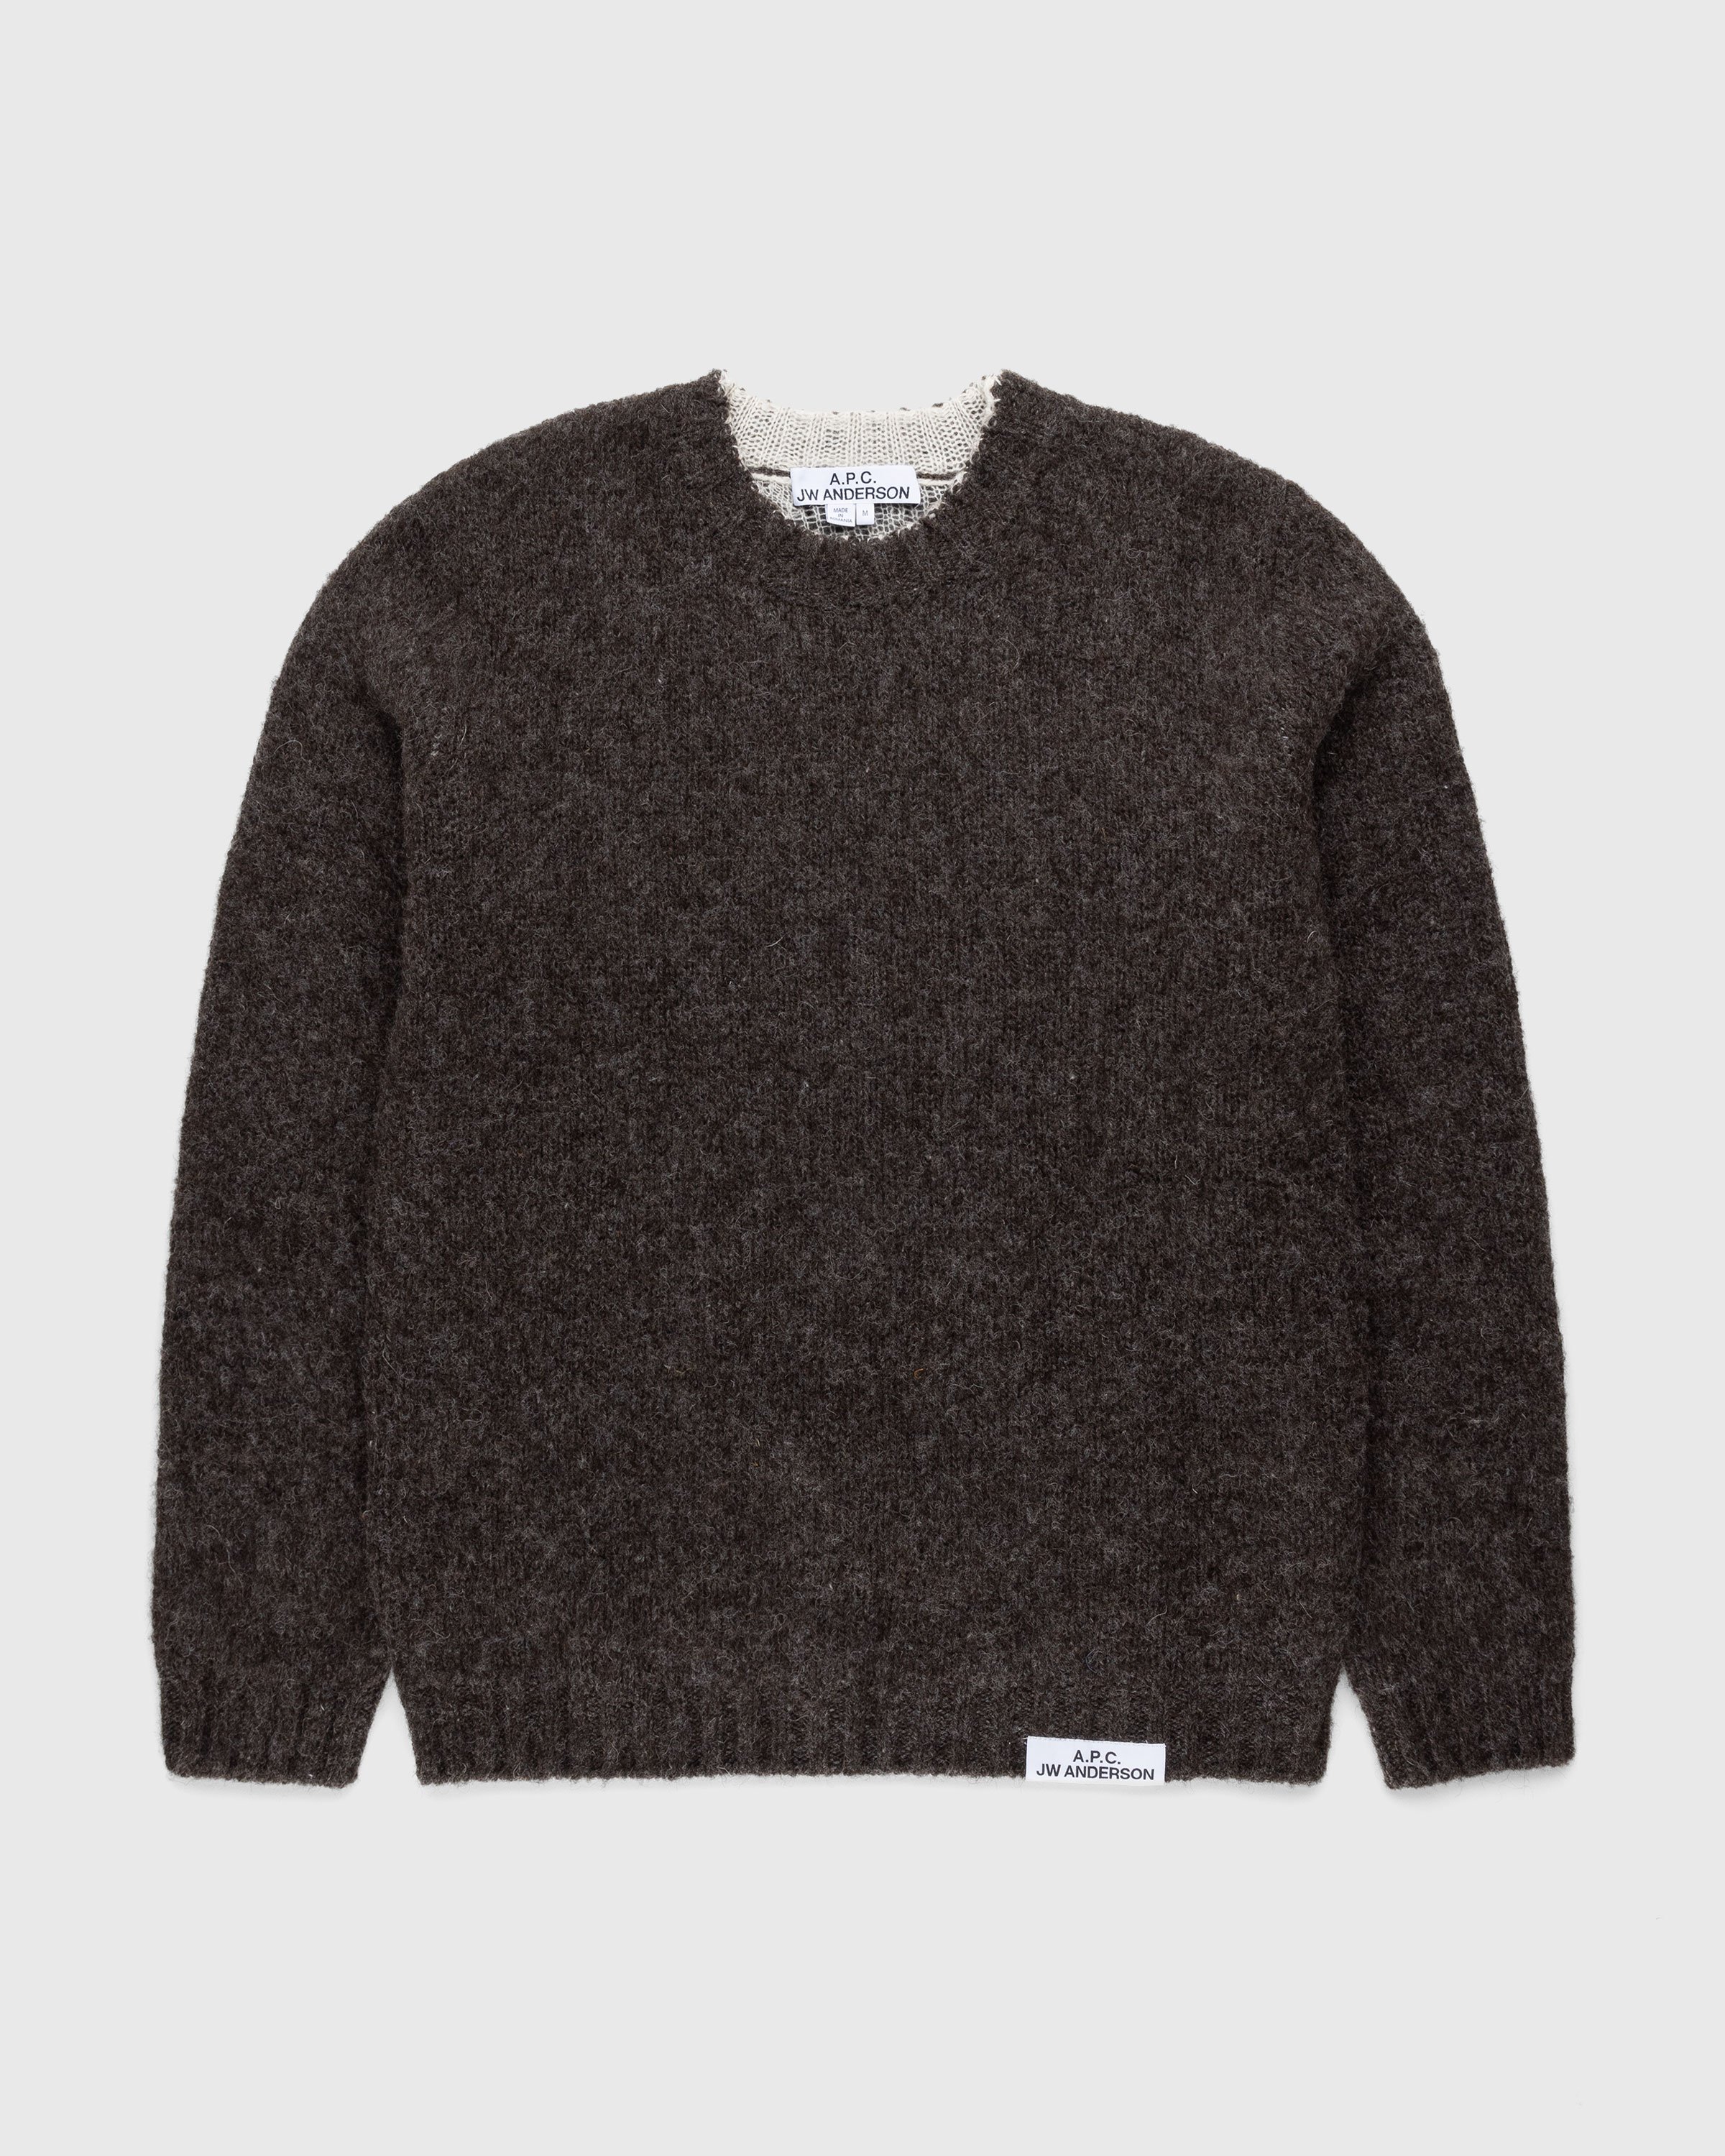 A.P.C. x J.W. Anderson - Pull Ange Brown - Clothing - brown - Image 2